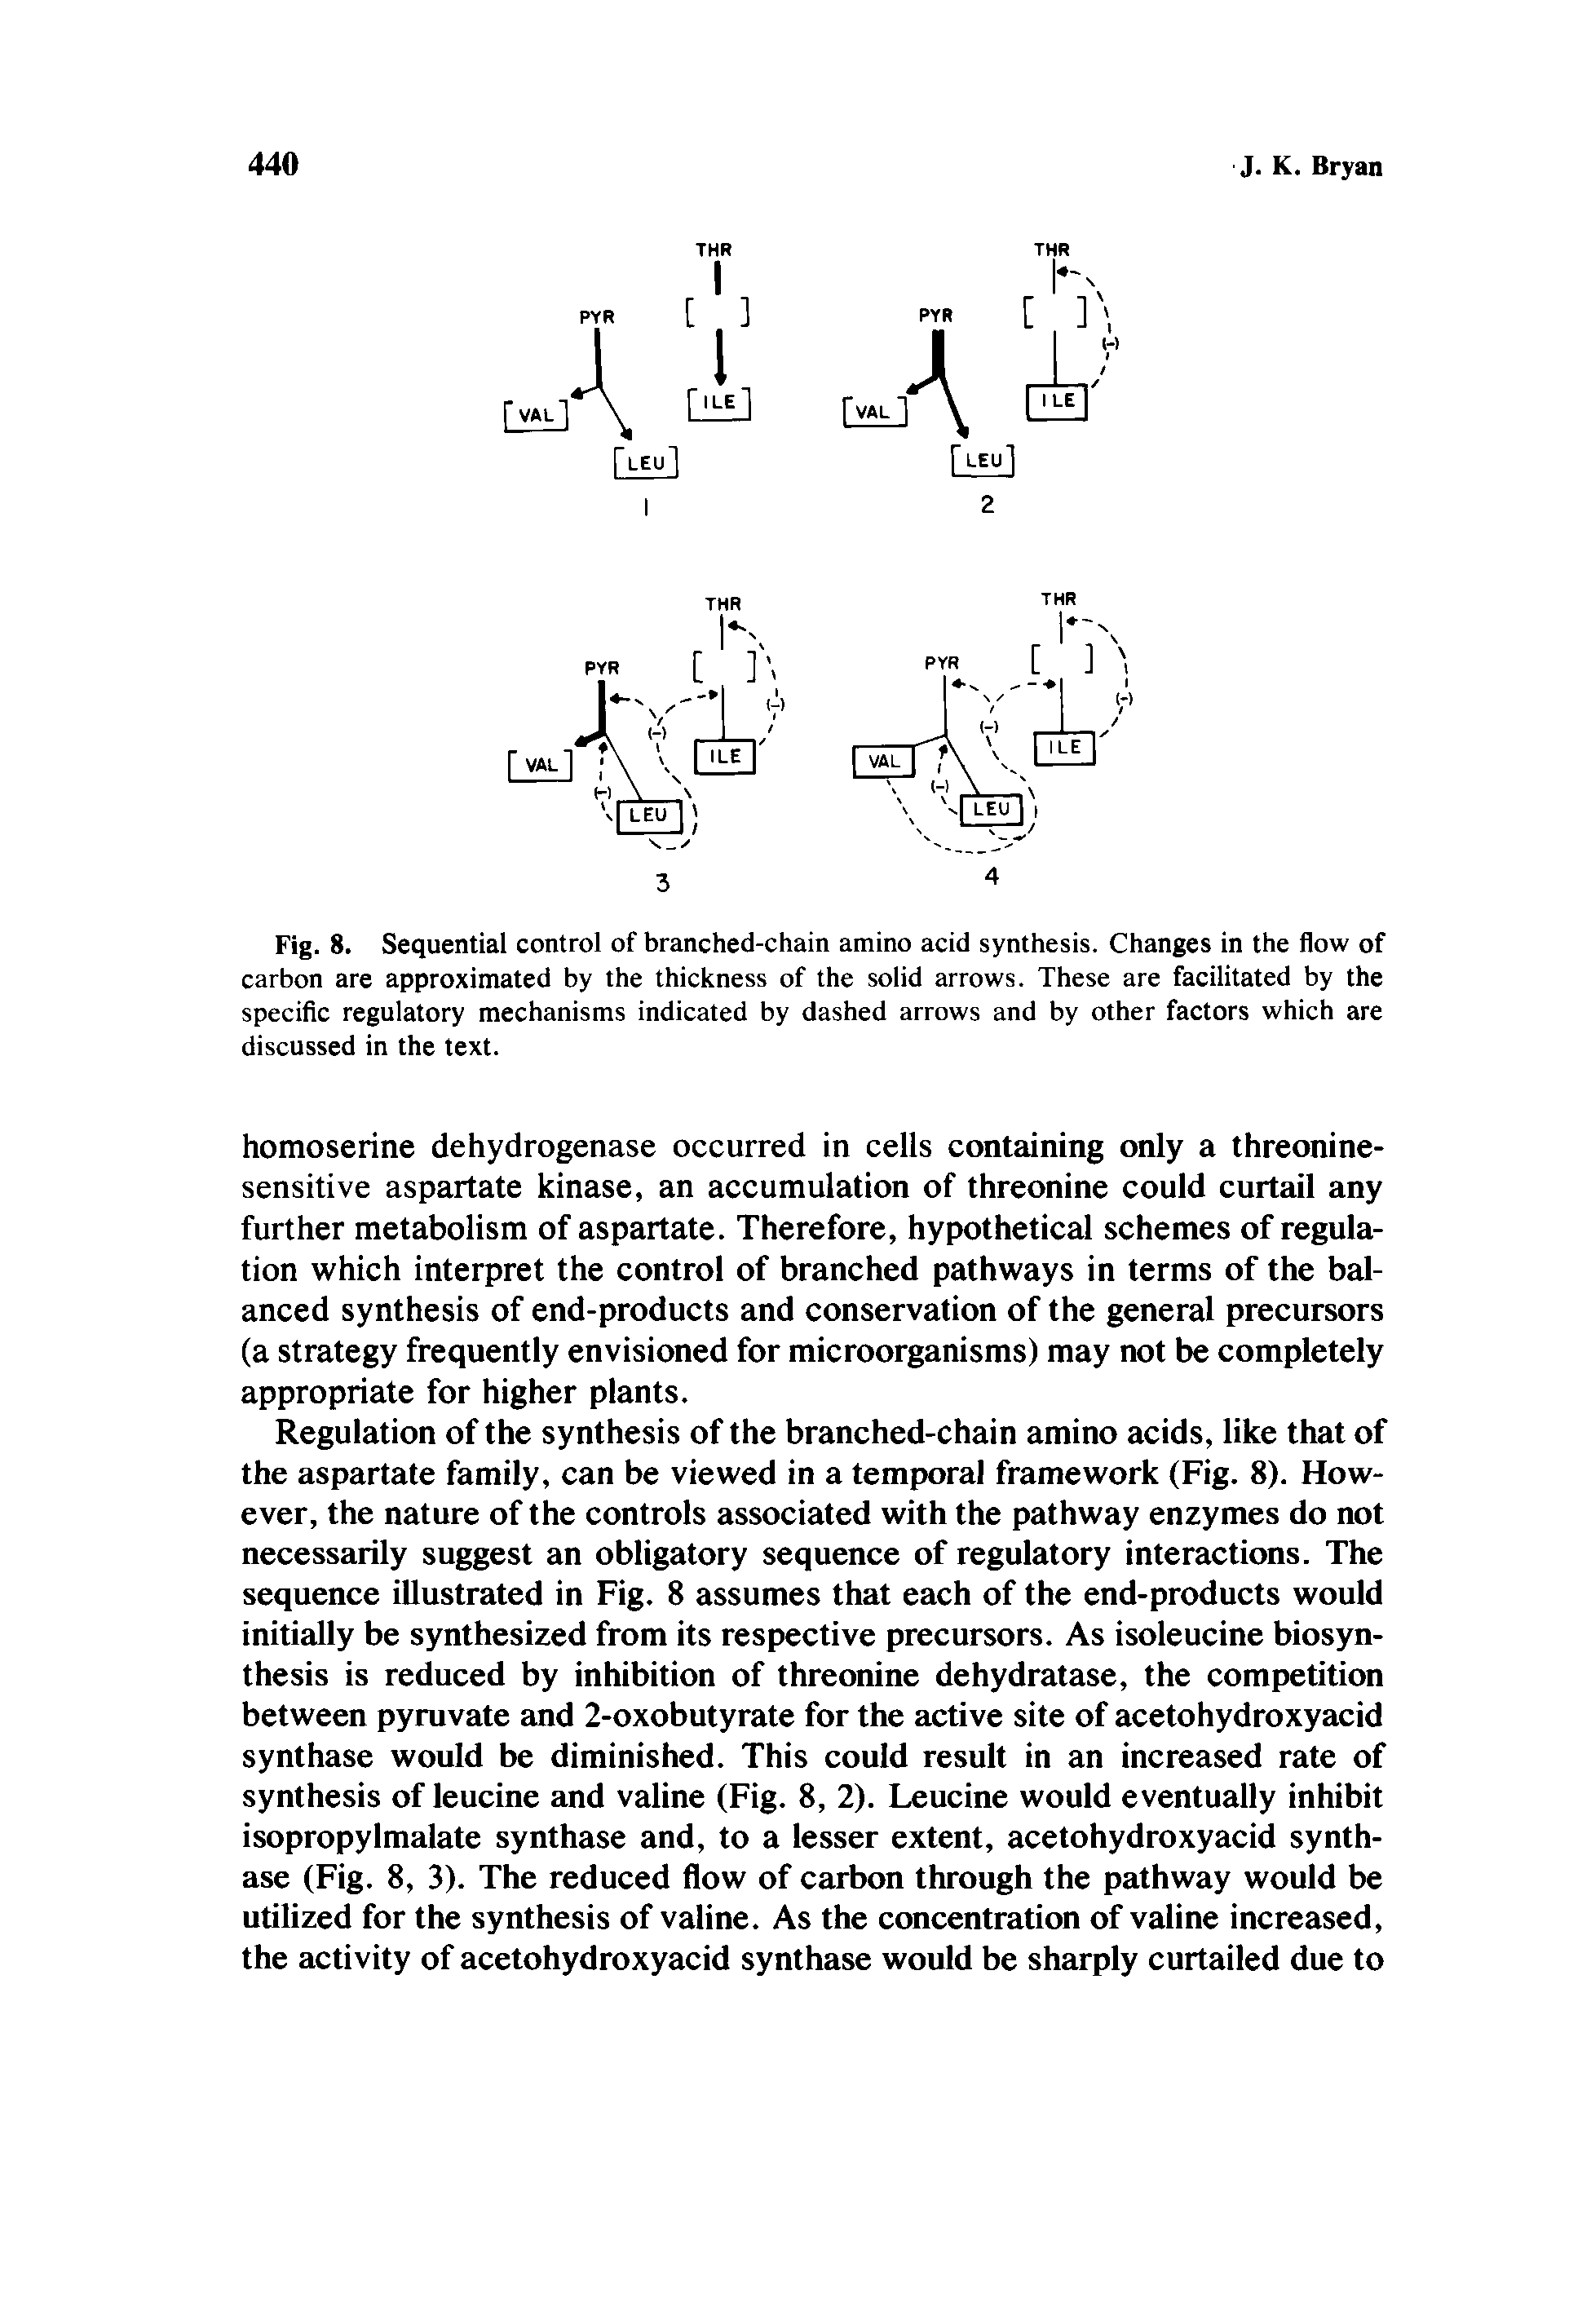 Fig. 8. Sequential control of branched-chain amino acid synthesis. Changes in the flow of carbon are approximated by the thickness of the solid arrows. These are facilitated by the specific regulatory mechanisms indicated by dashed arrows and by other factors which are discussed in the text.